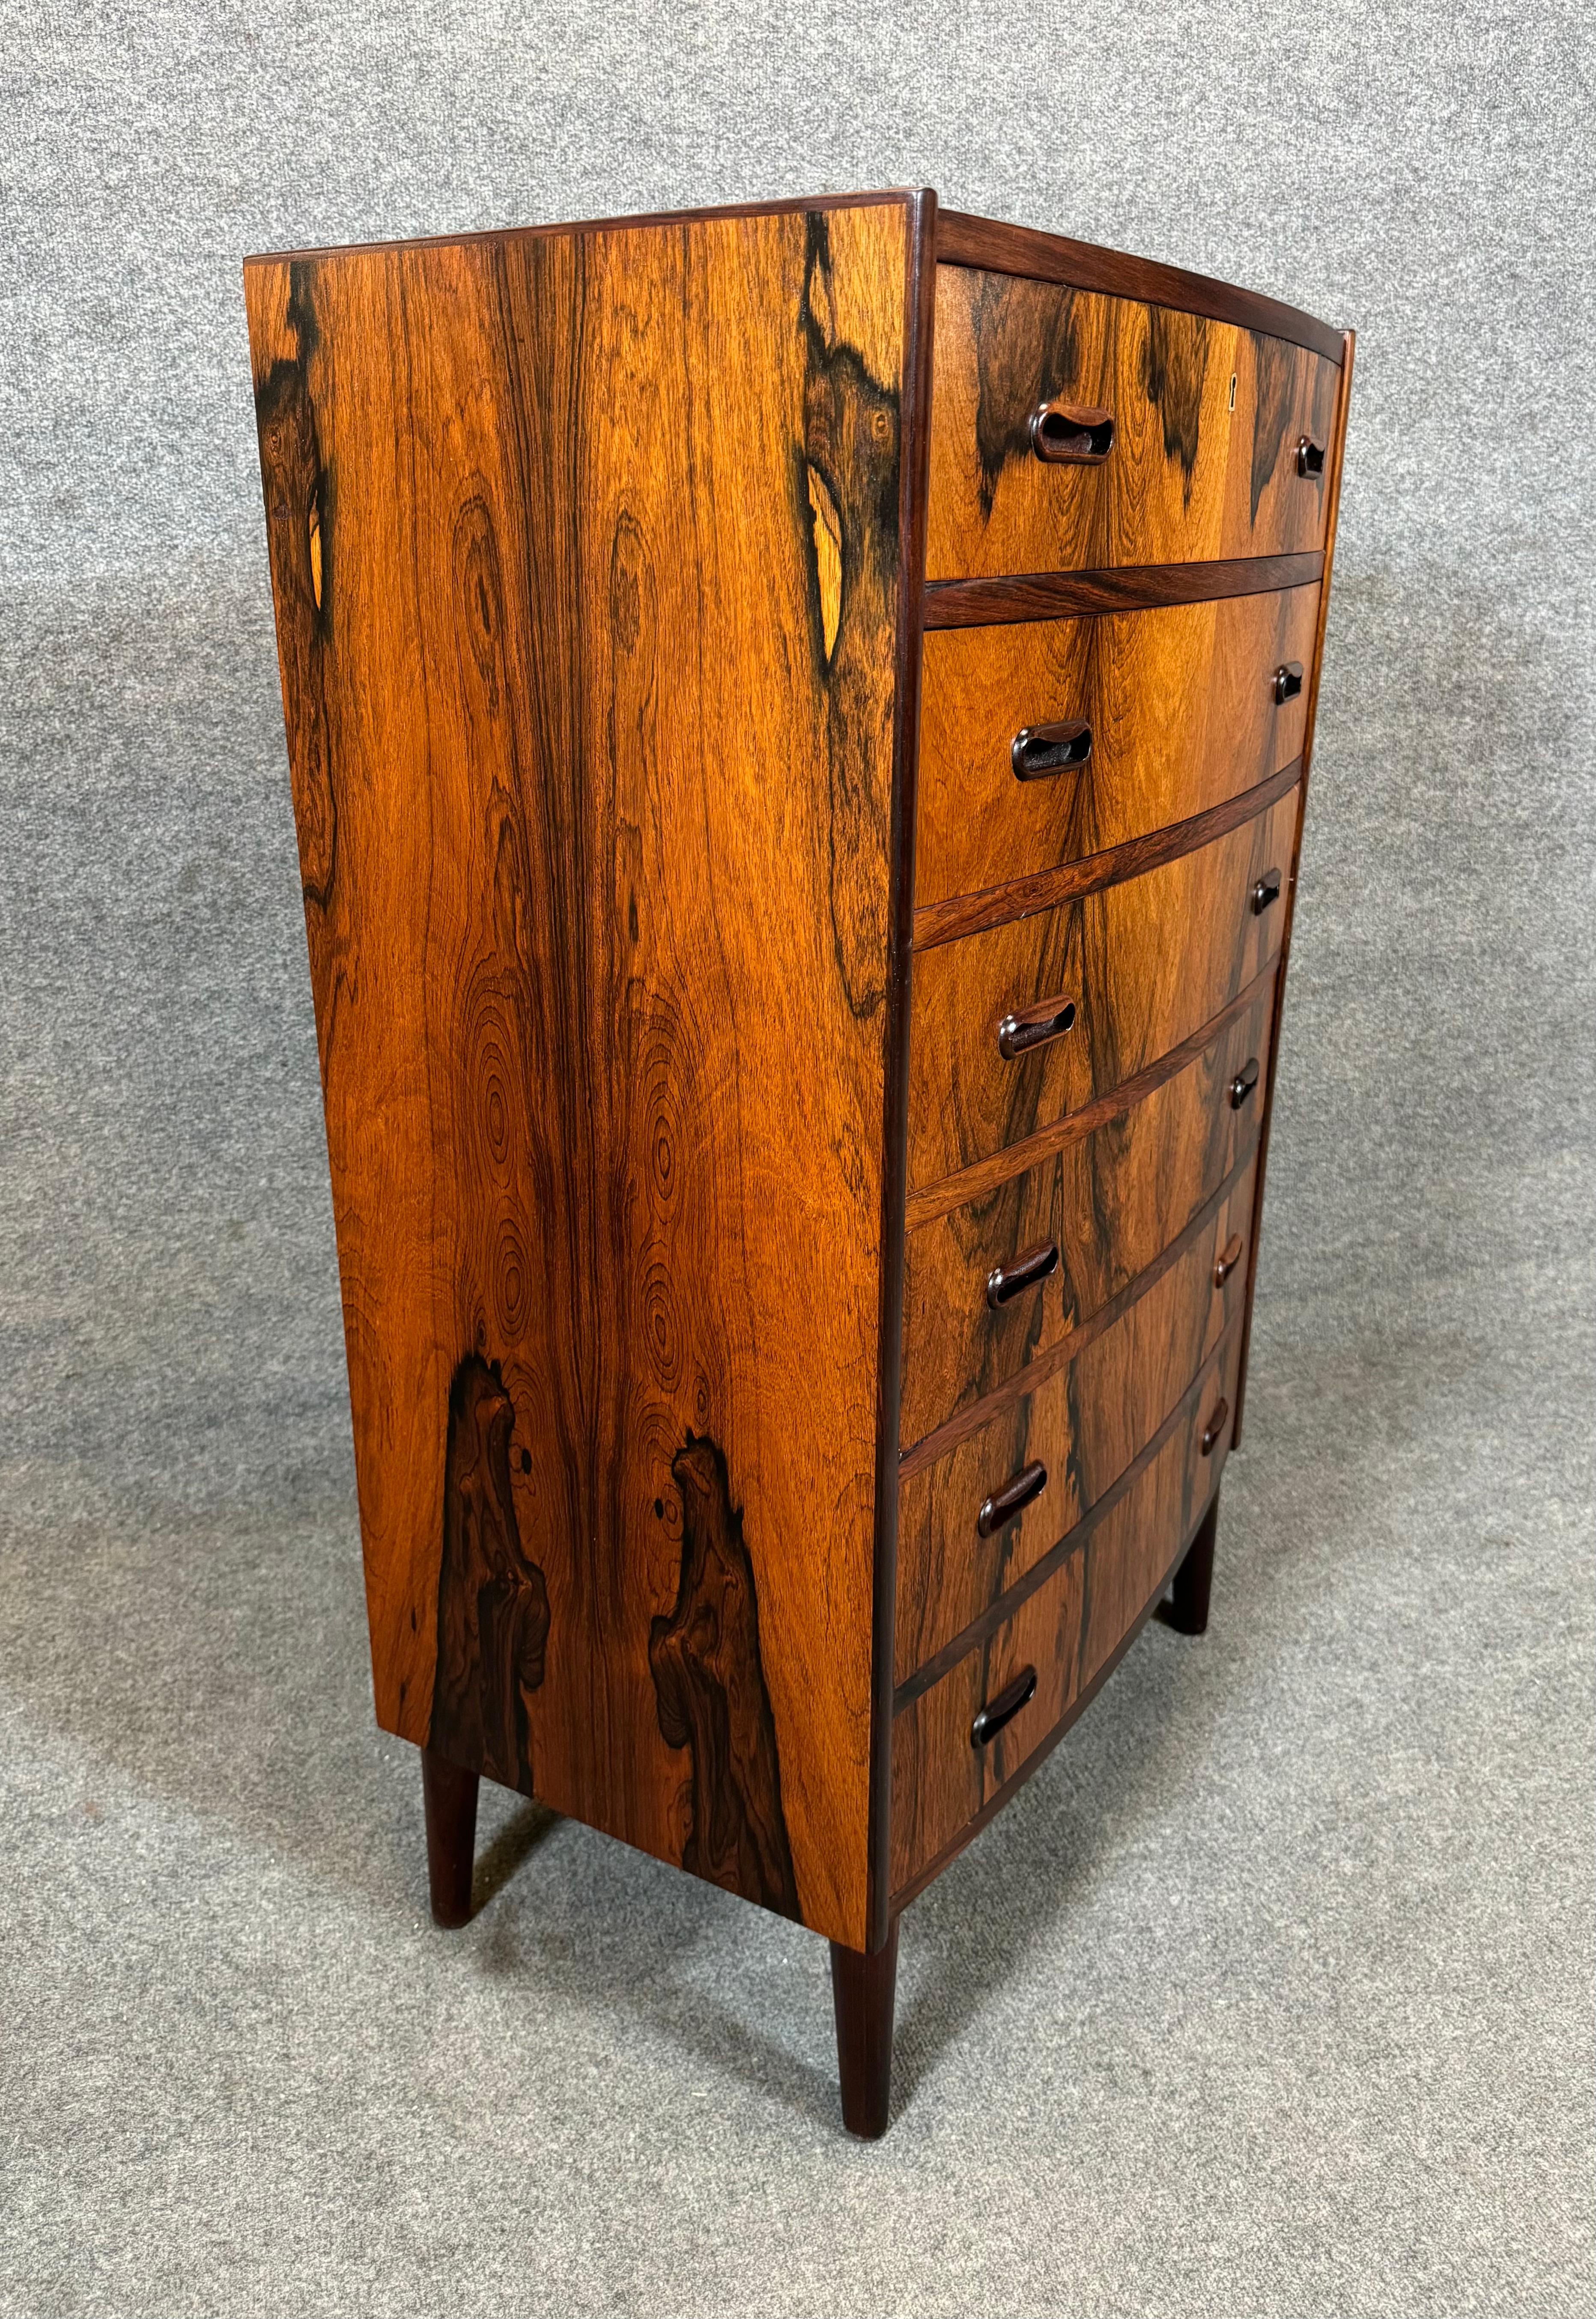 Here is a very special scandinavian modern chest of drawer dresser in rosewood manufactured in Denmark in the 1960's.
This beautiful piece, reminiscent of Arne Vodder's design, features highly figurative wood grain details, a bank of six dove tail